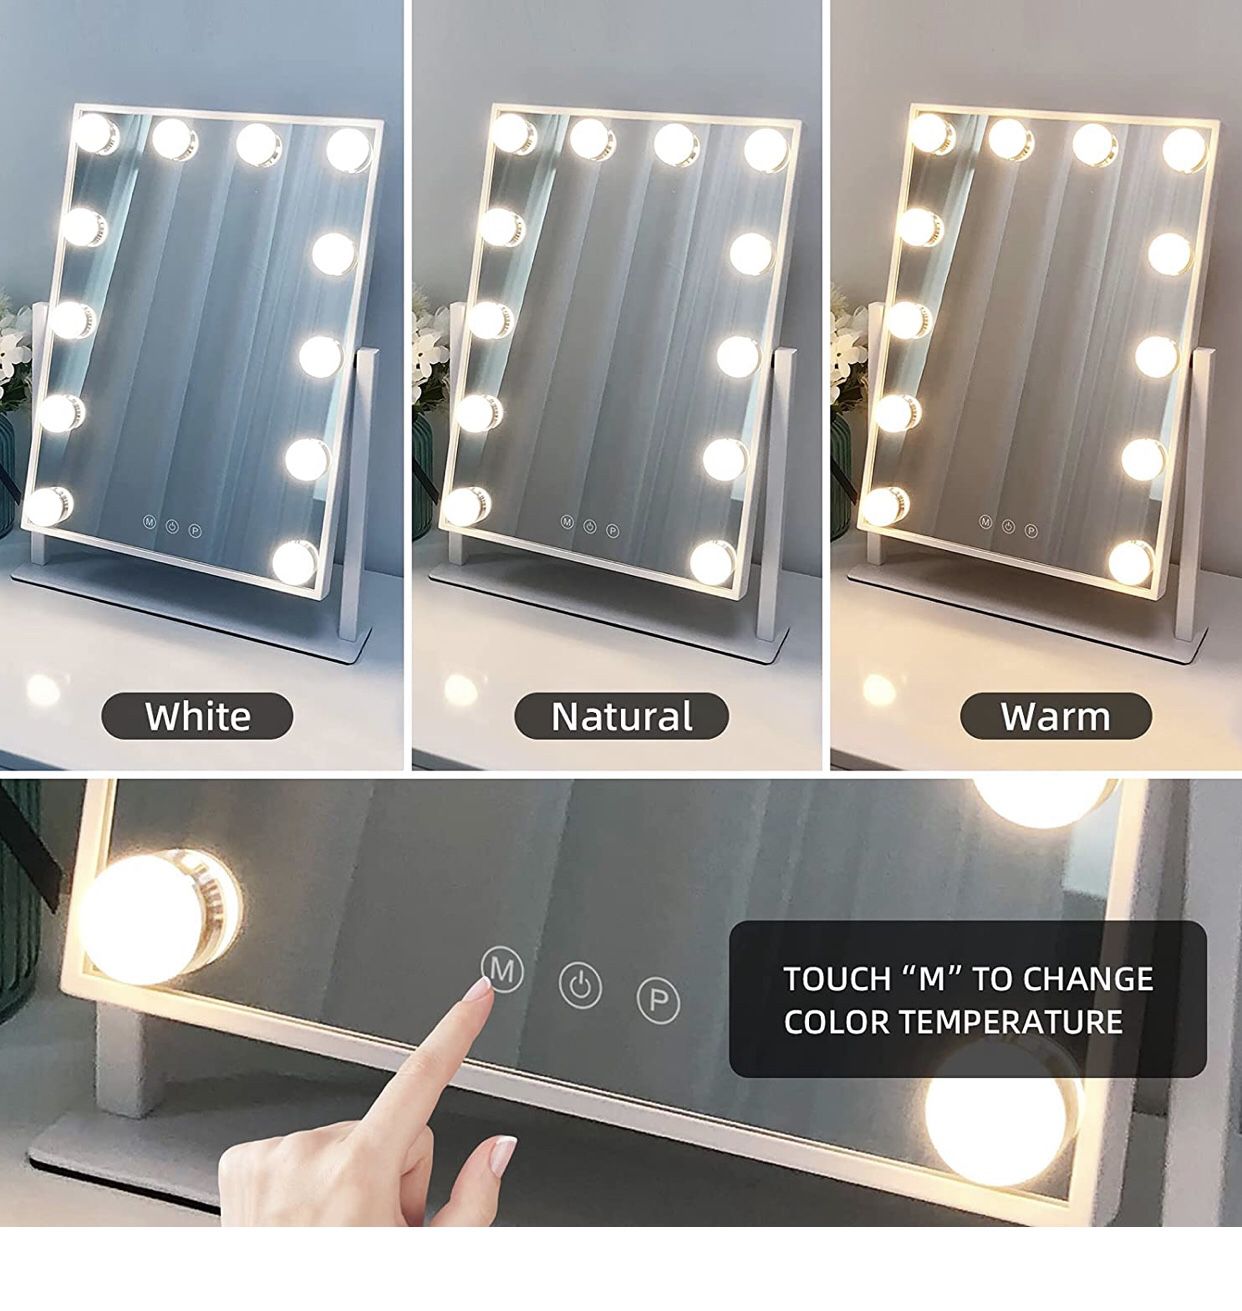 Light Up Vanity Makeup Mirror with Lights, Table Desktop Hollywood Led Makeup Mirror with Stand and Table Set